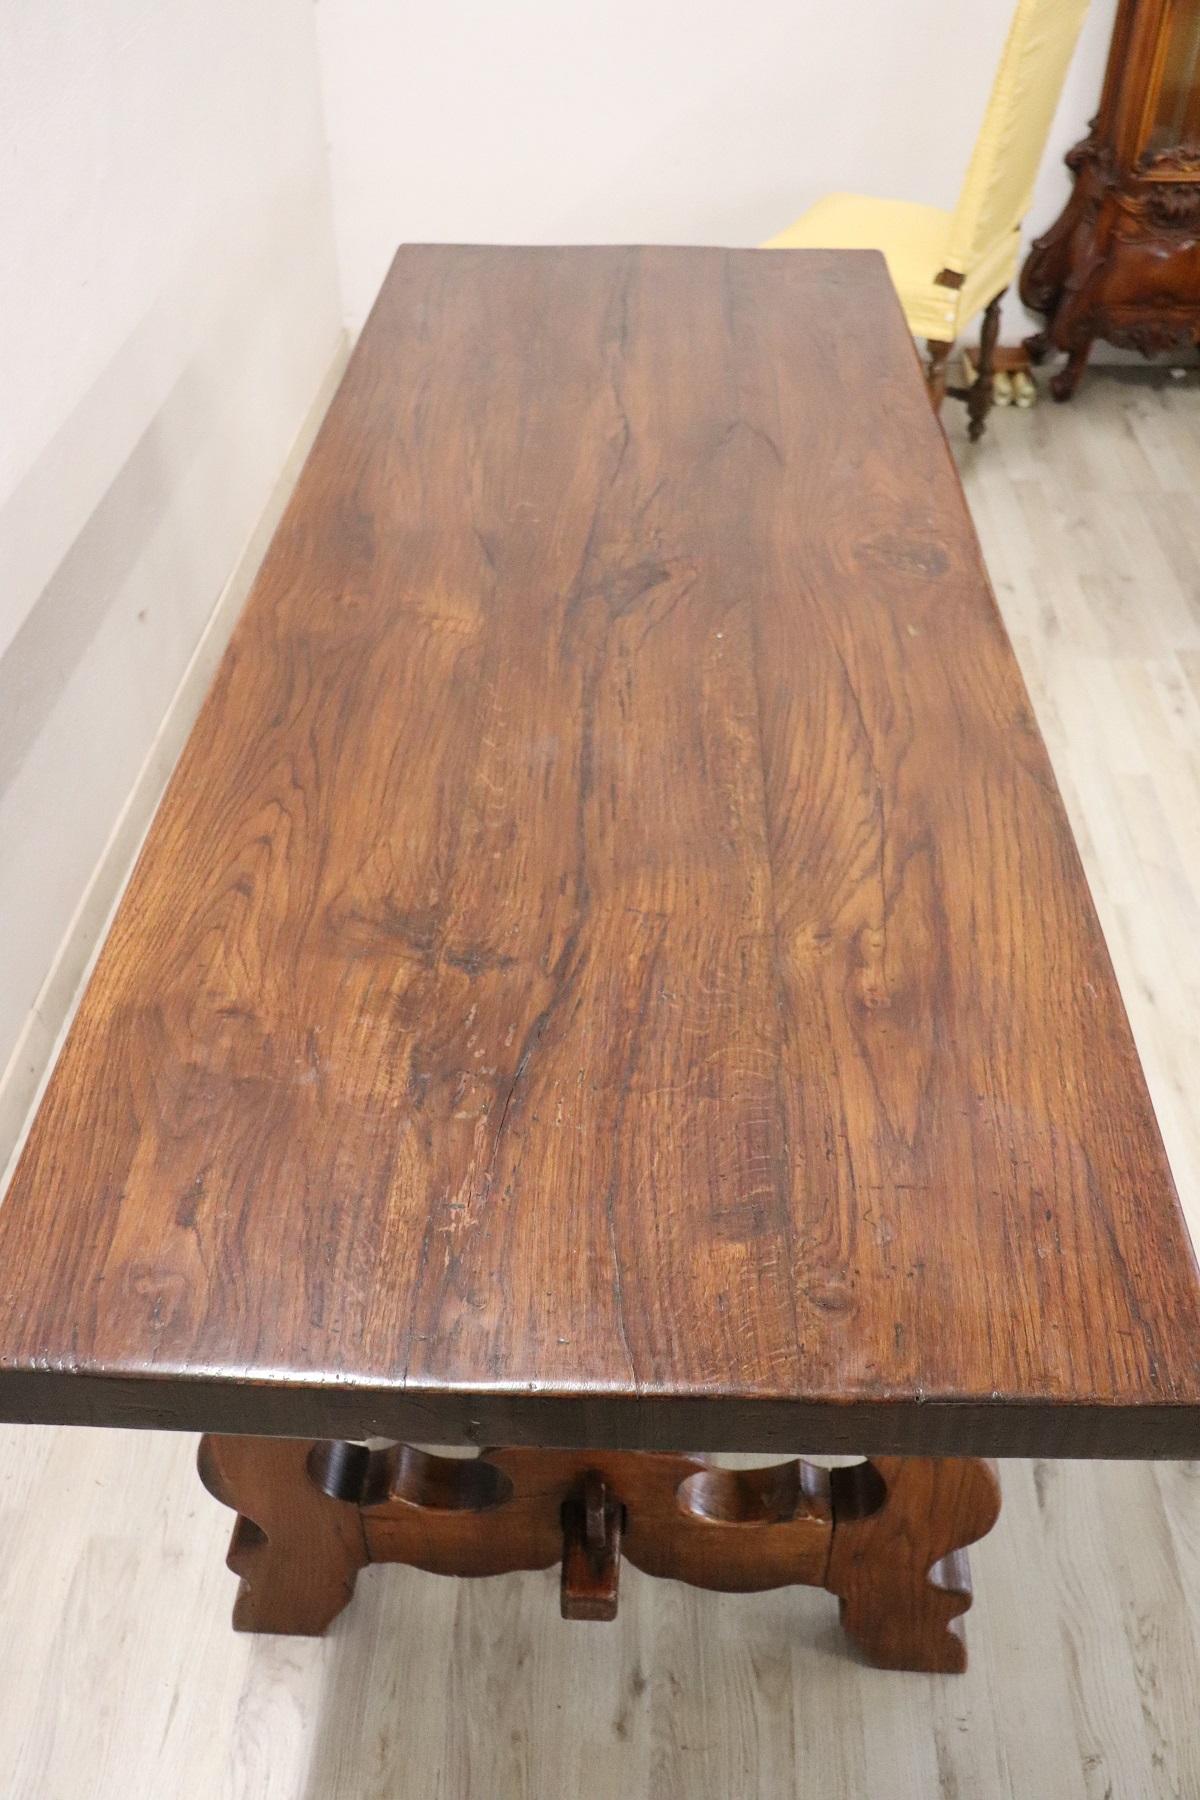 Large solid oakwood table from the mid-20th century. Oakwood has a beautiful patina. Particular lyre-shaped legs.
Perfect to be used for your dining room.